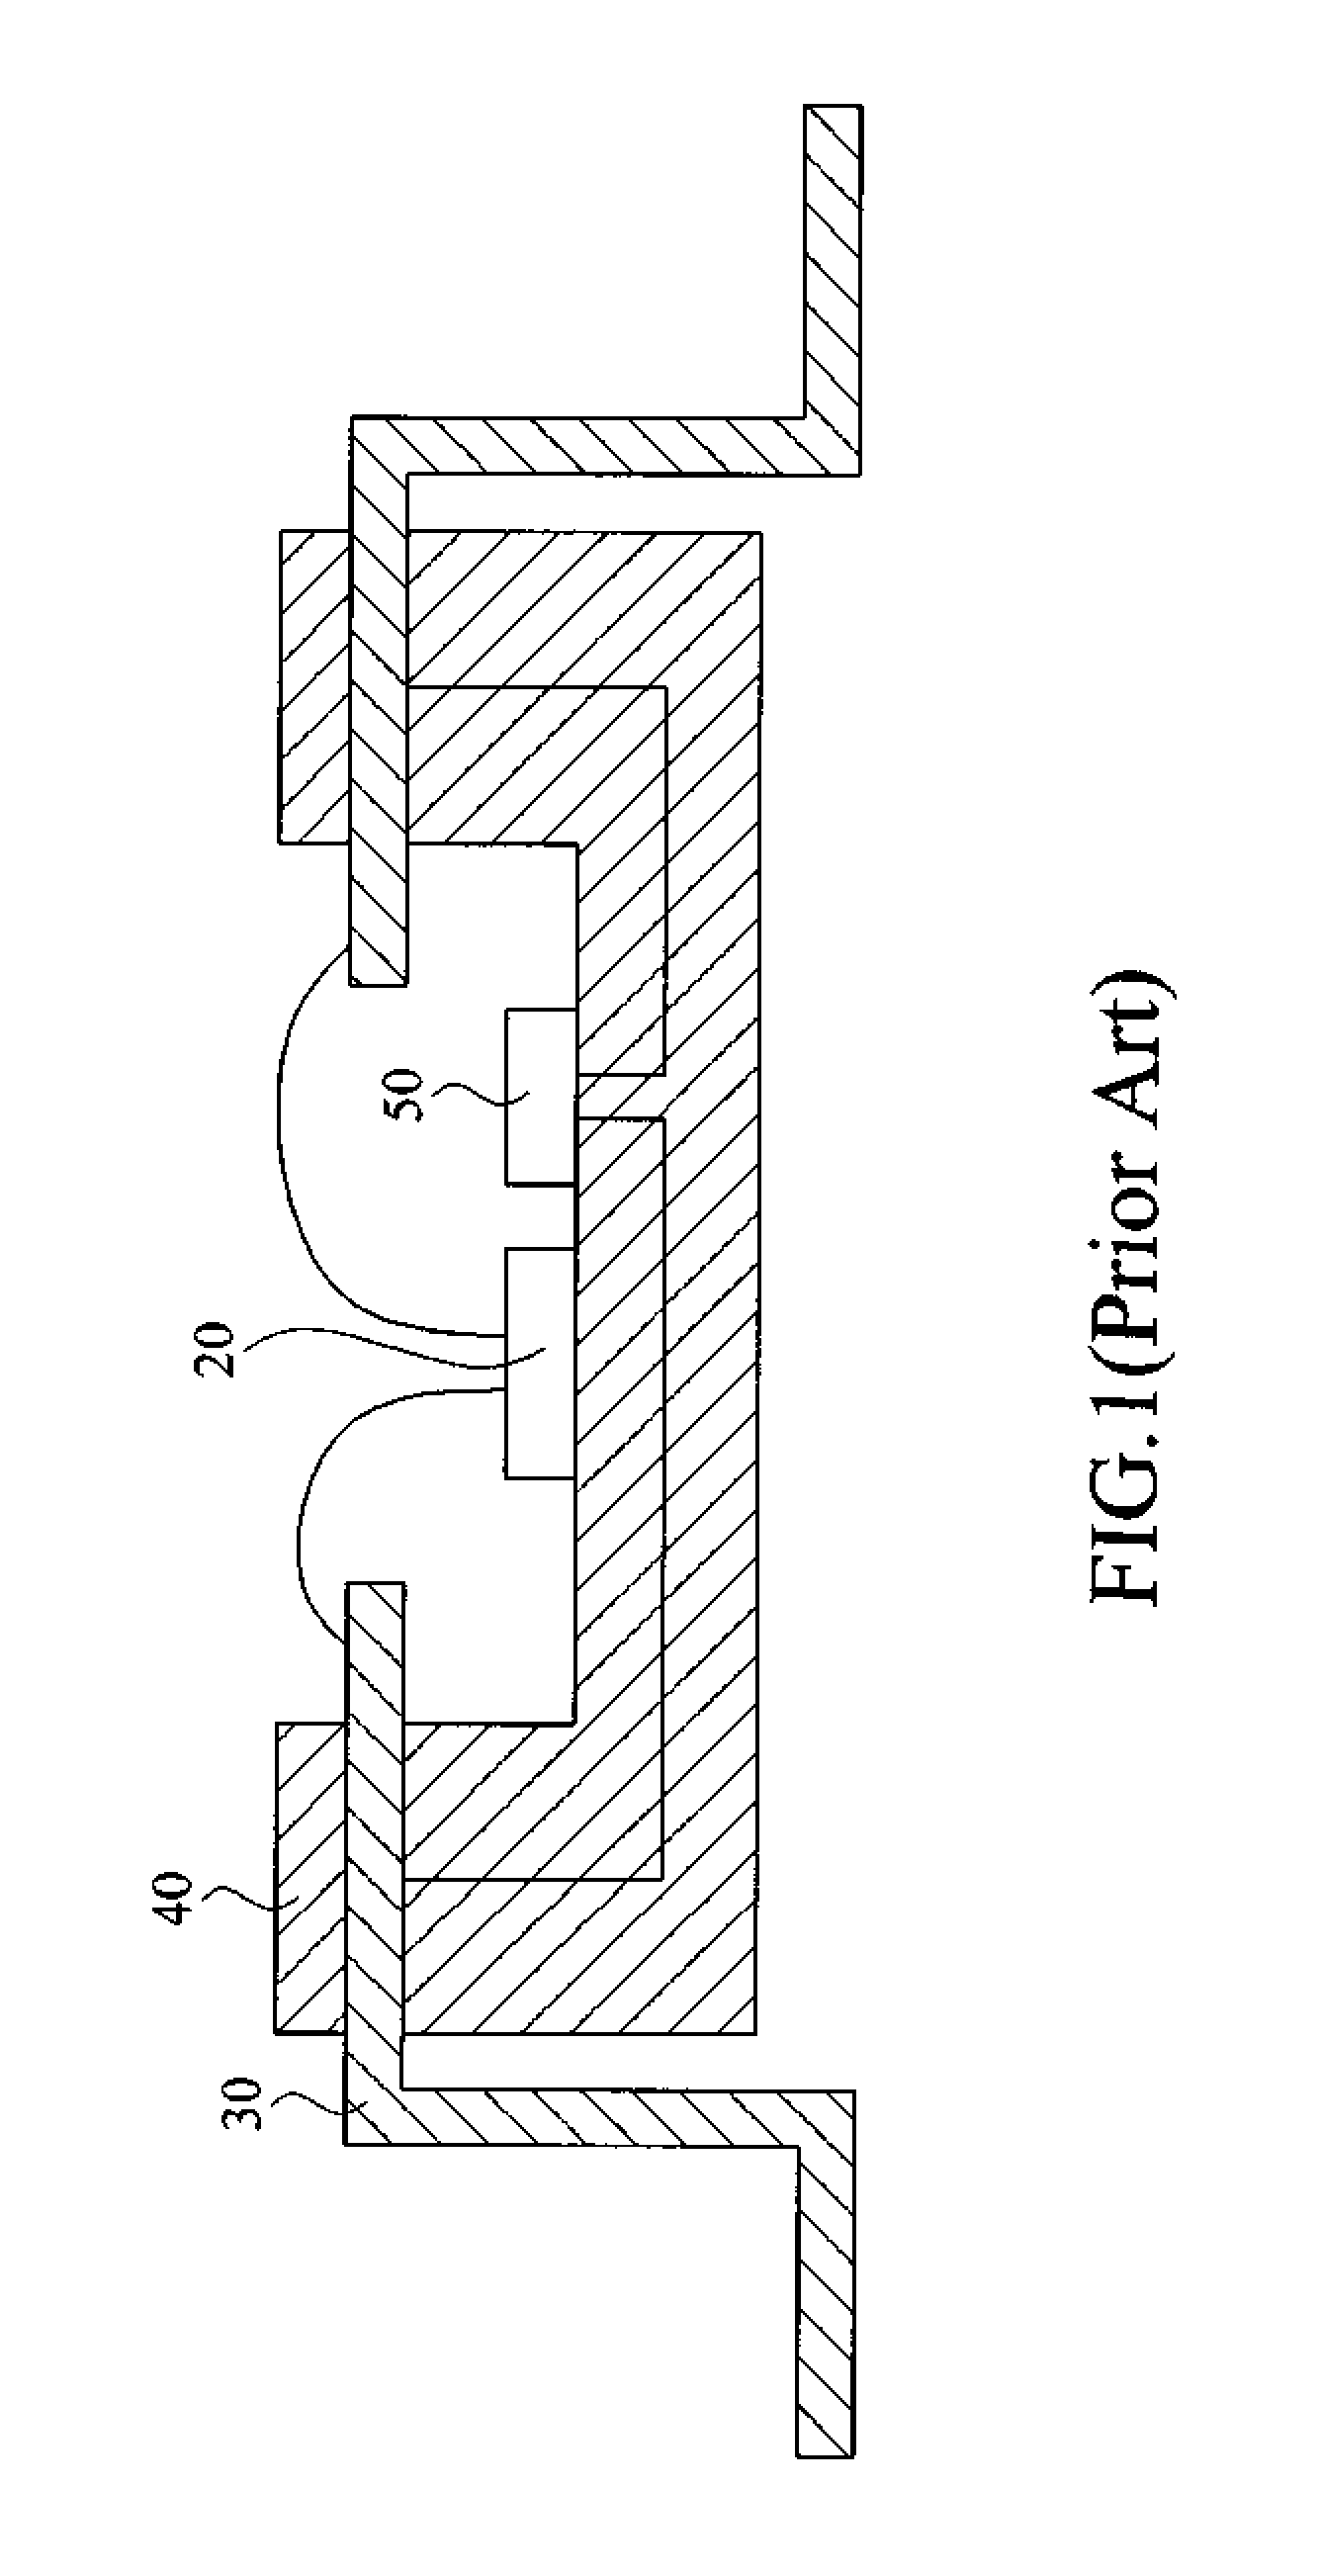 Carrier structure for mounting LED chips